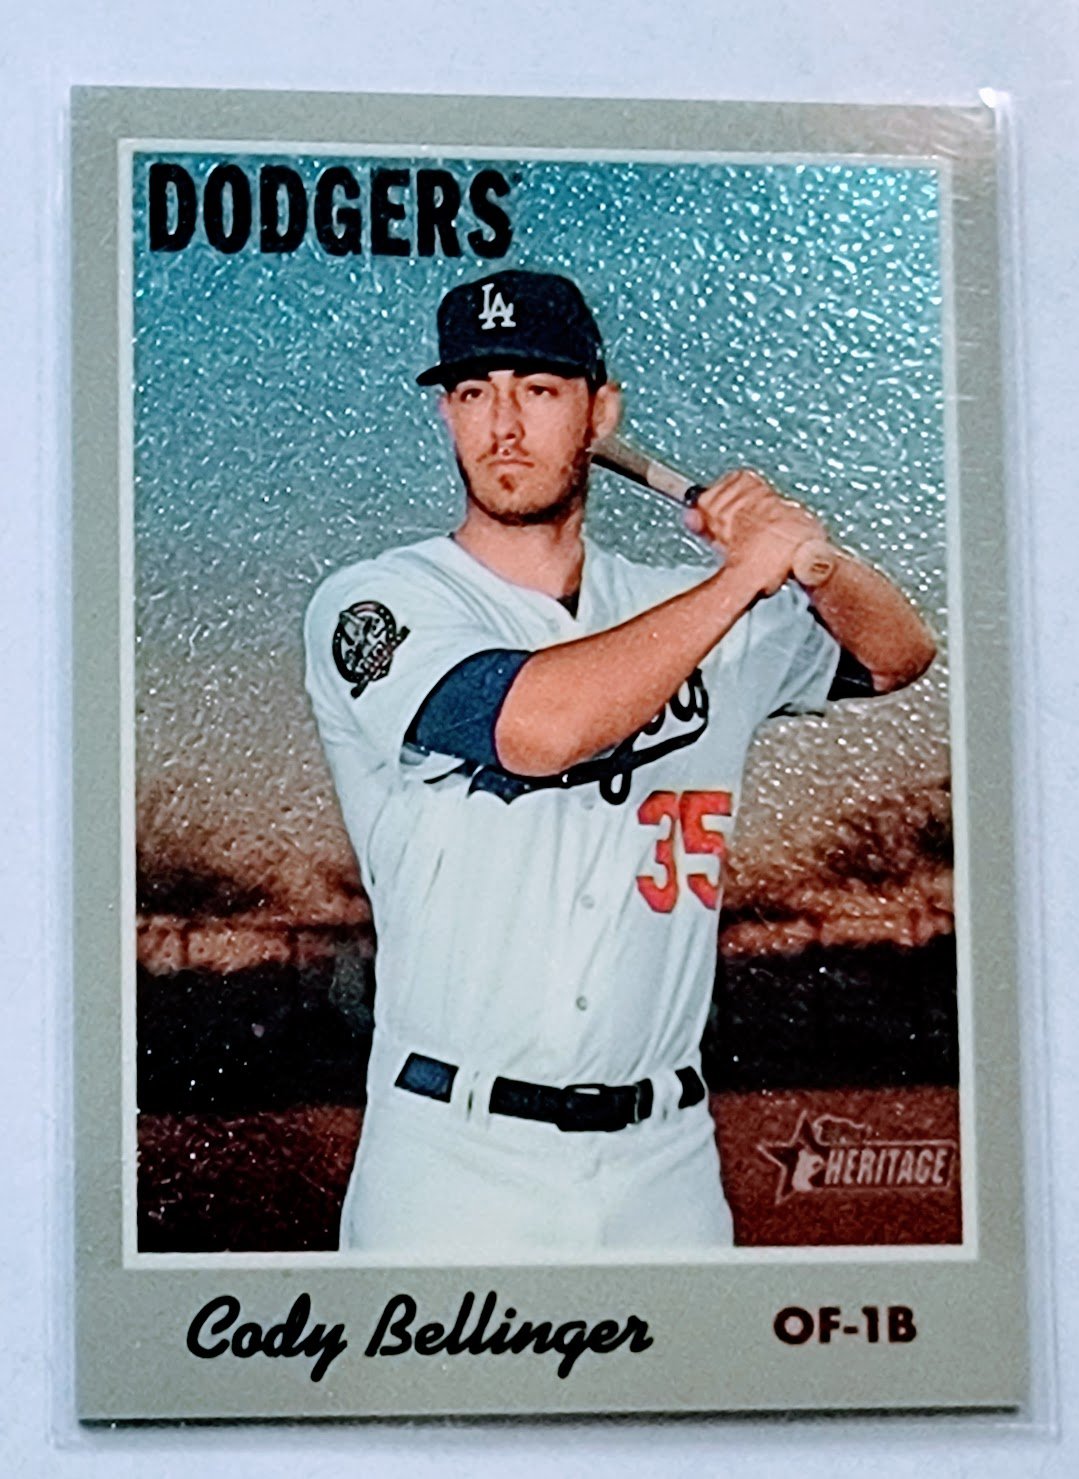 2019 Topps Heritage Cody Bellinger Chrome #'d/999 Baseball Trading Card TPTV simple Xclusive Collectibles   